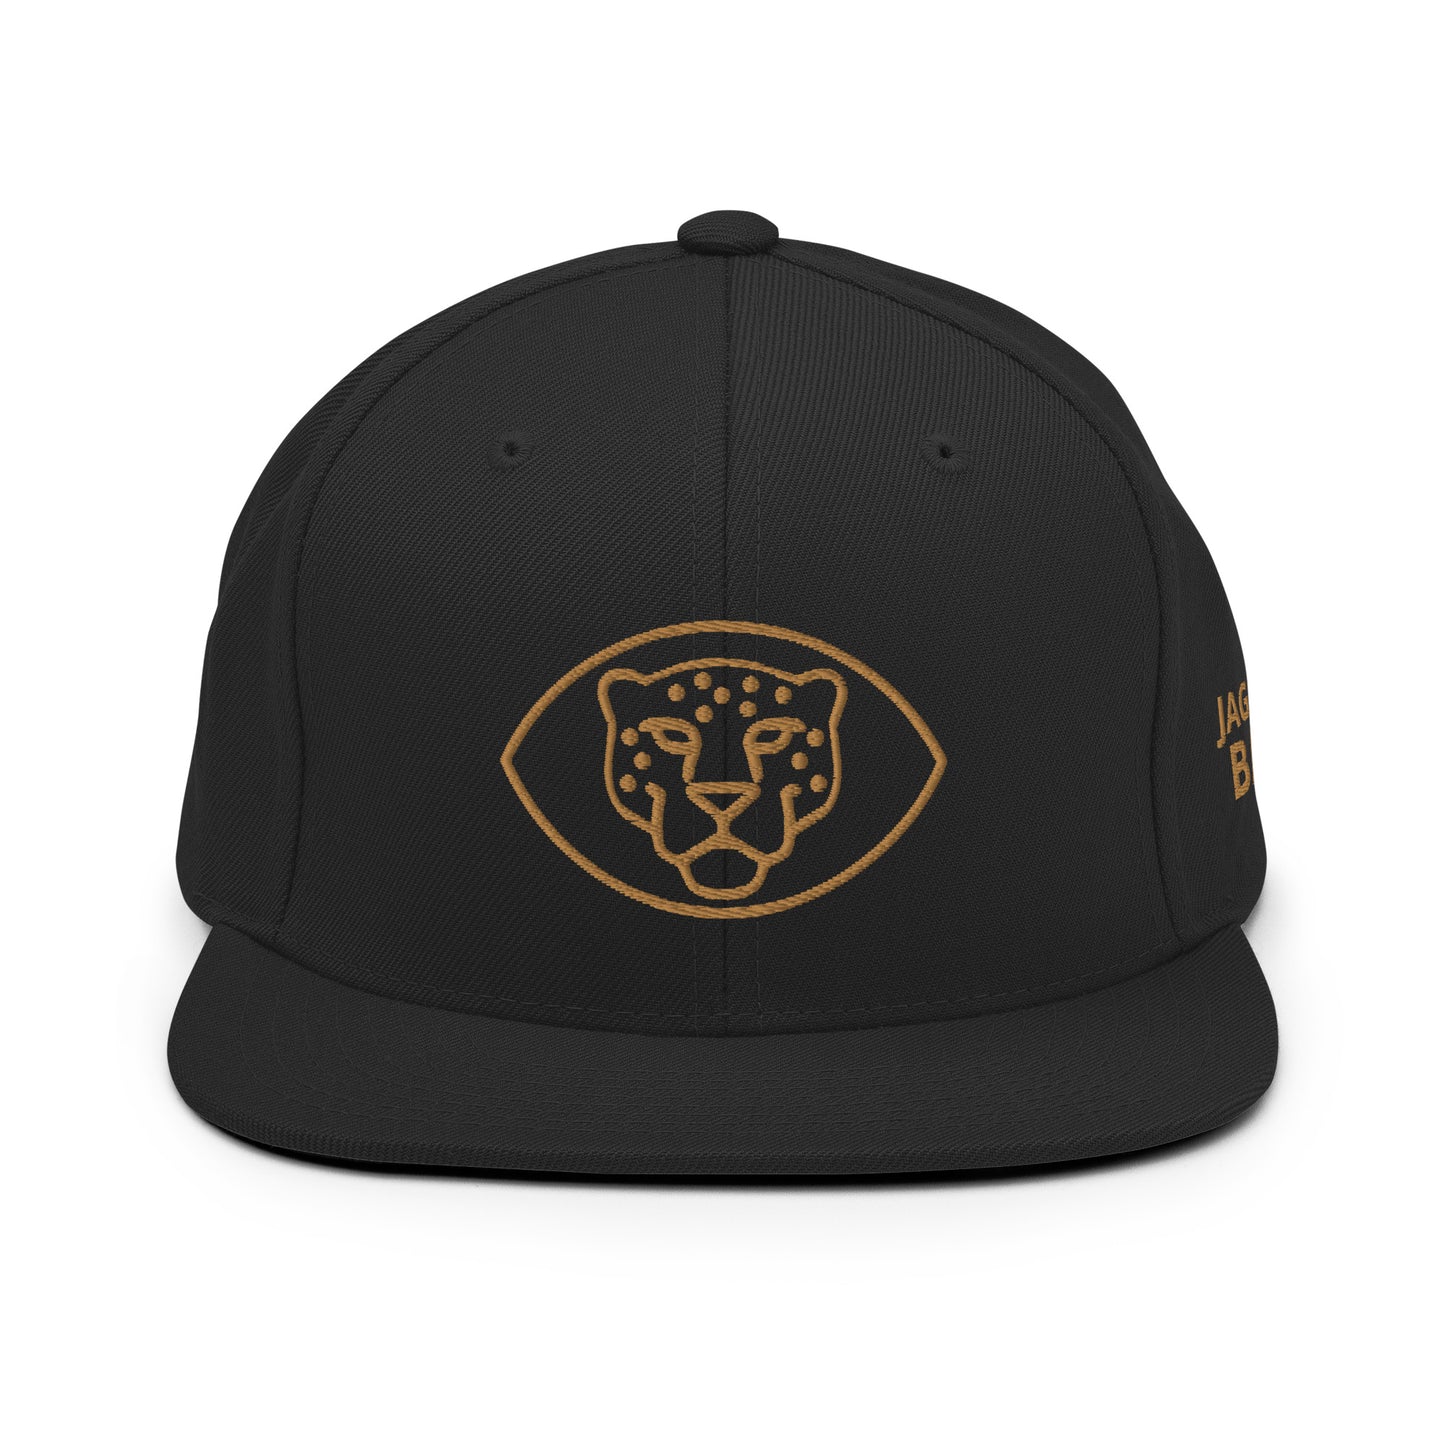 Jags Are Back Snapback Hat